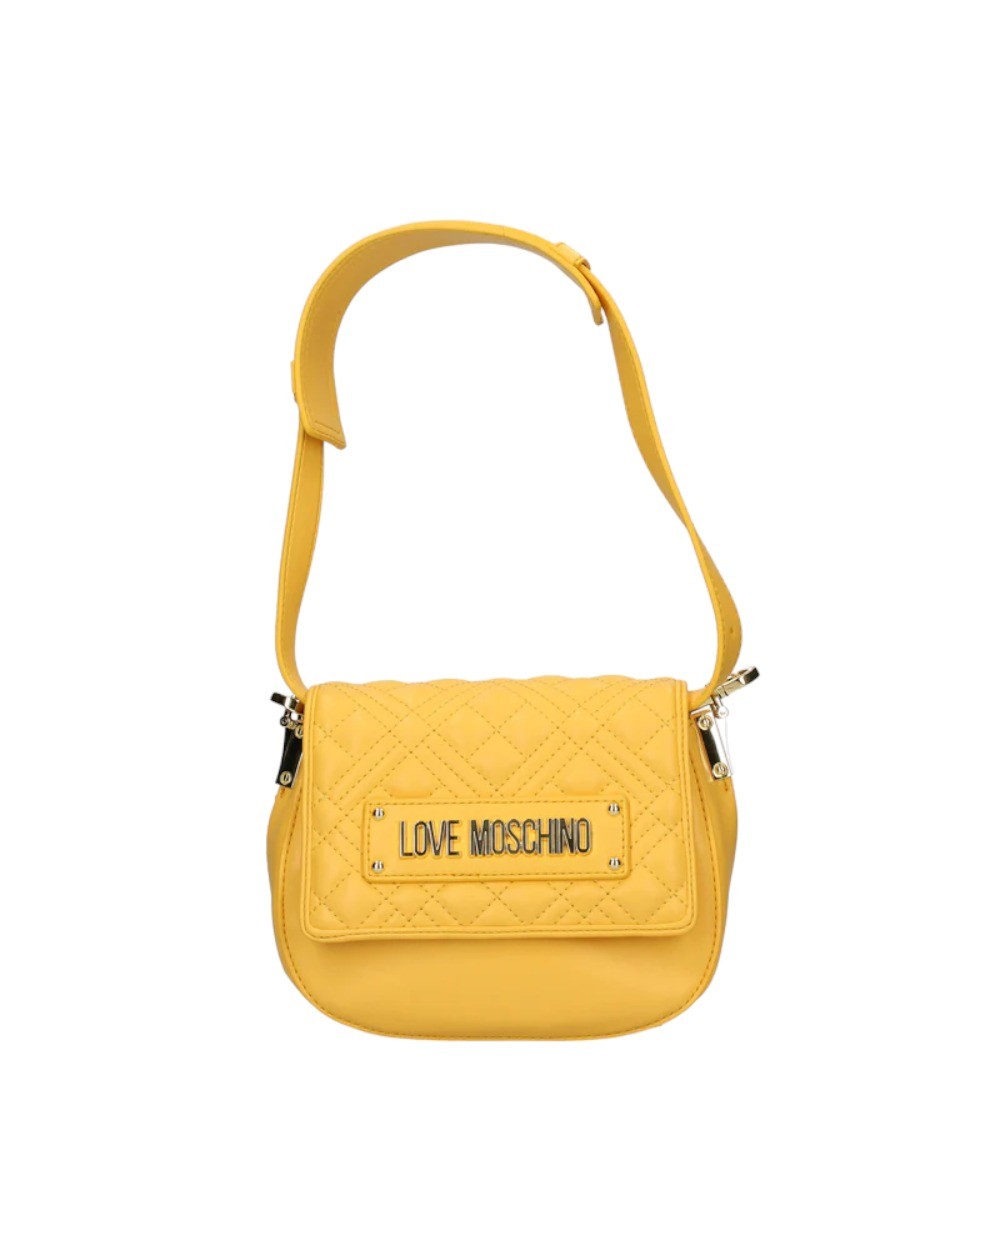 https://inoutroma.it/18779-large_default/jc4310pp0ela0400-love-moschino-borsa-donna-a-tracolla-quilted-pu-giallo.jpg